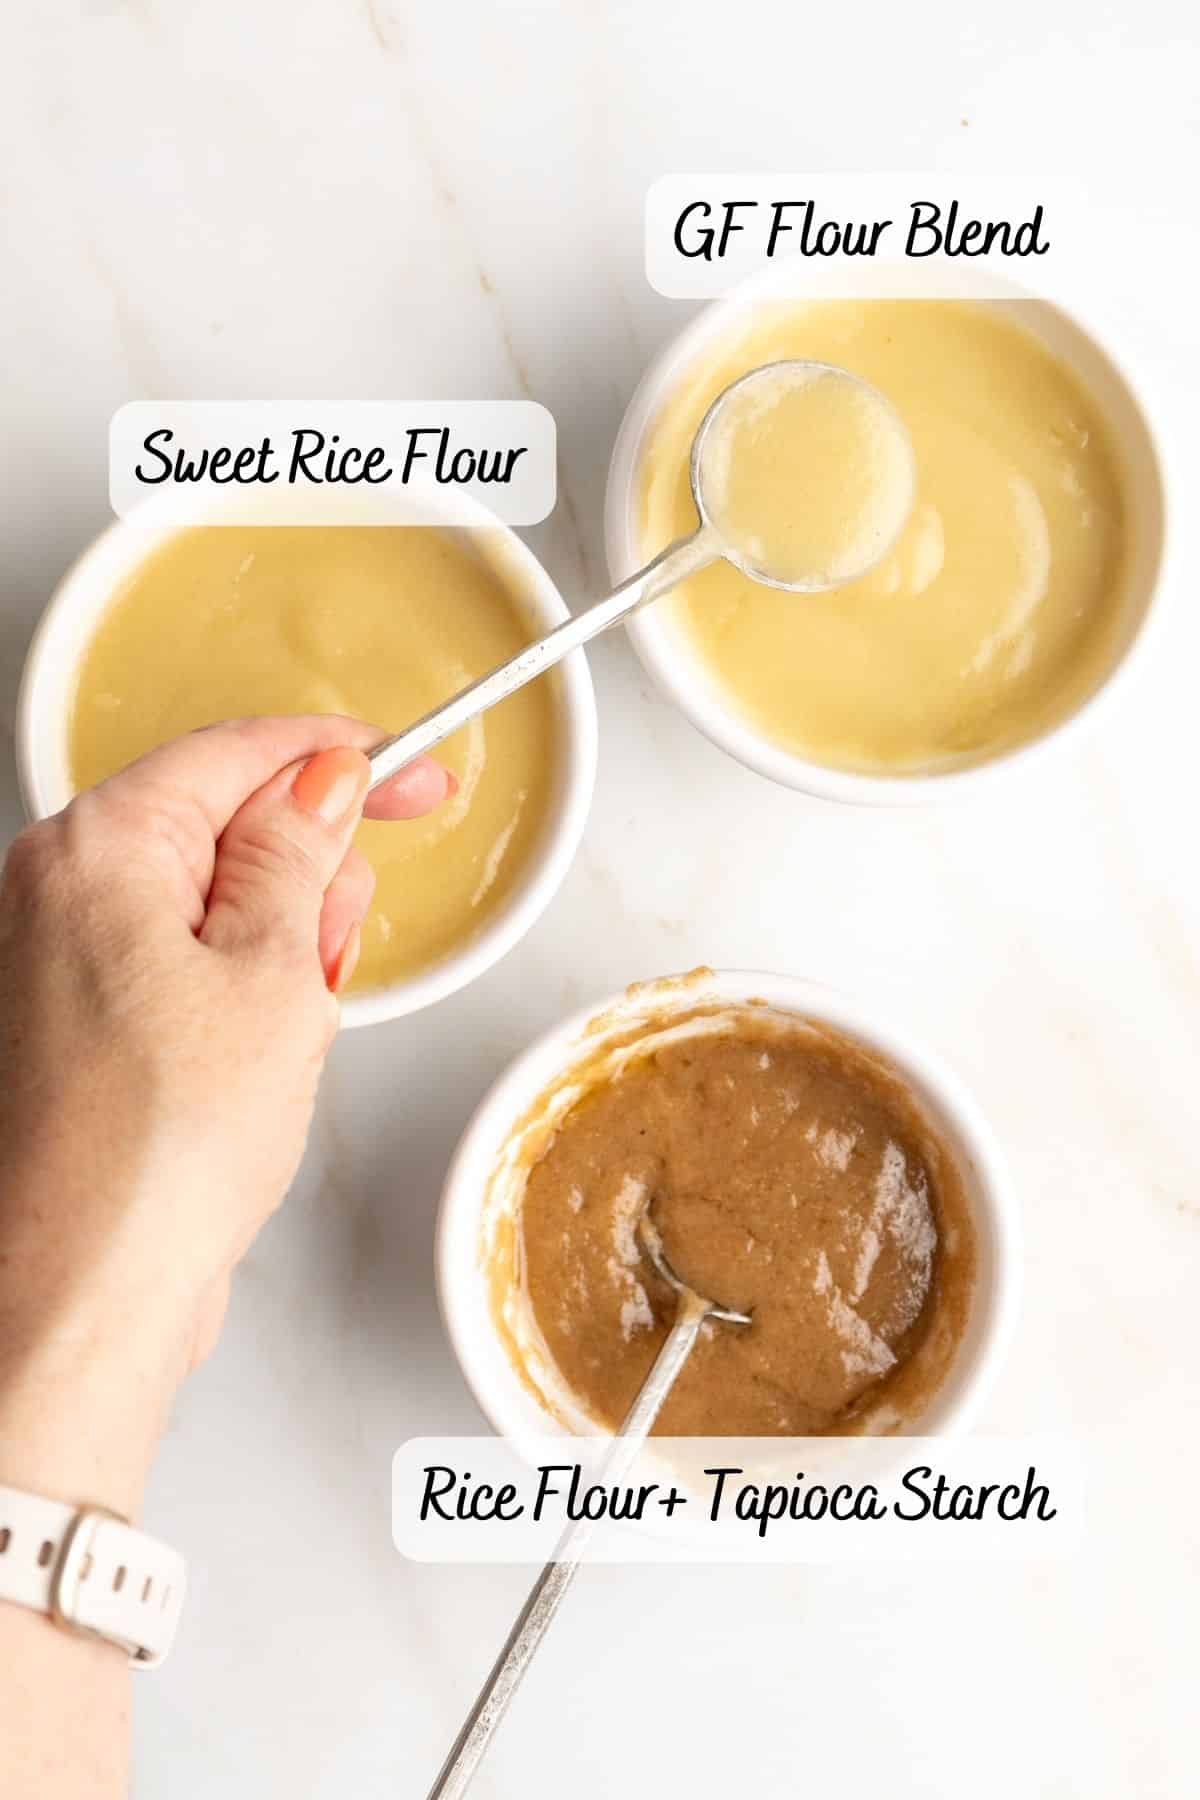 Three different sauces made with gluten-free roux.